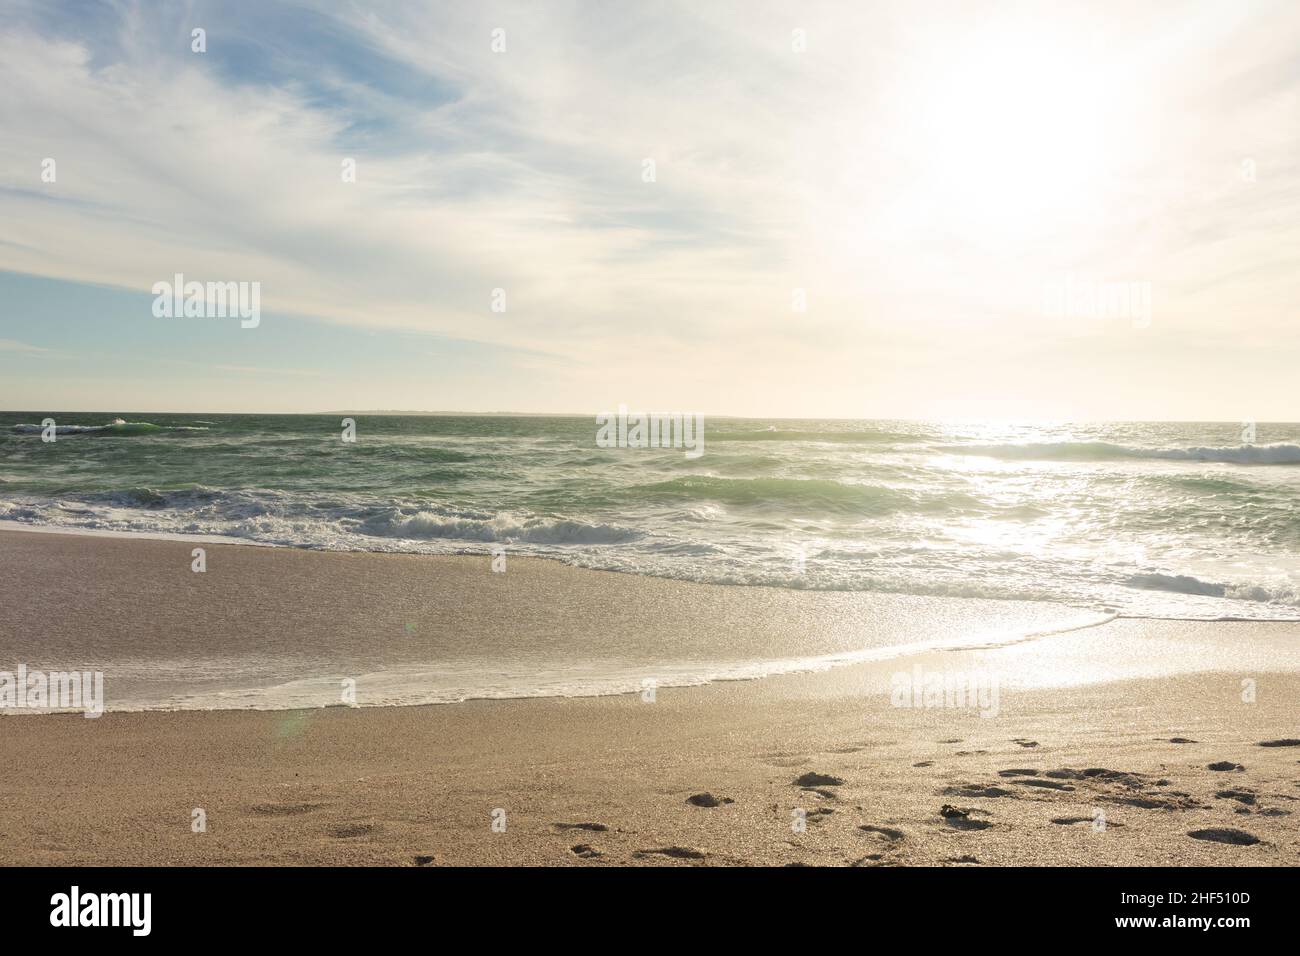 Scenic view of waves on shore at beach against sky during sunny day Stock Photo